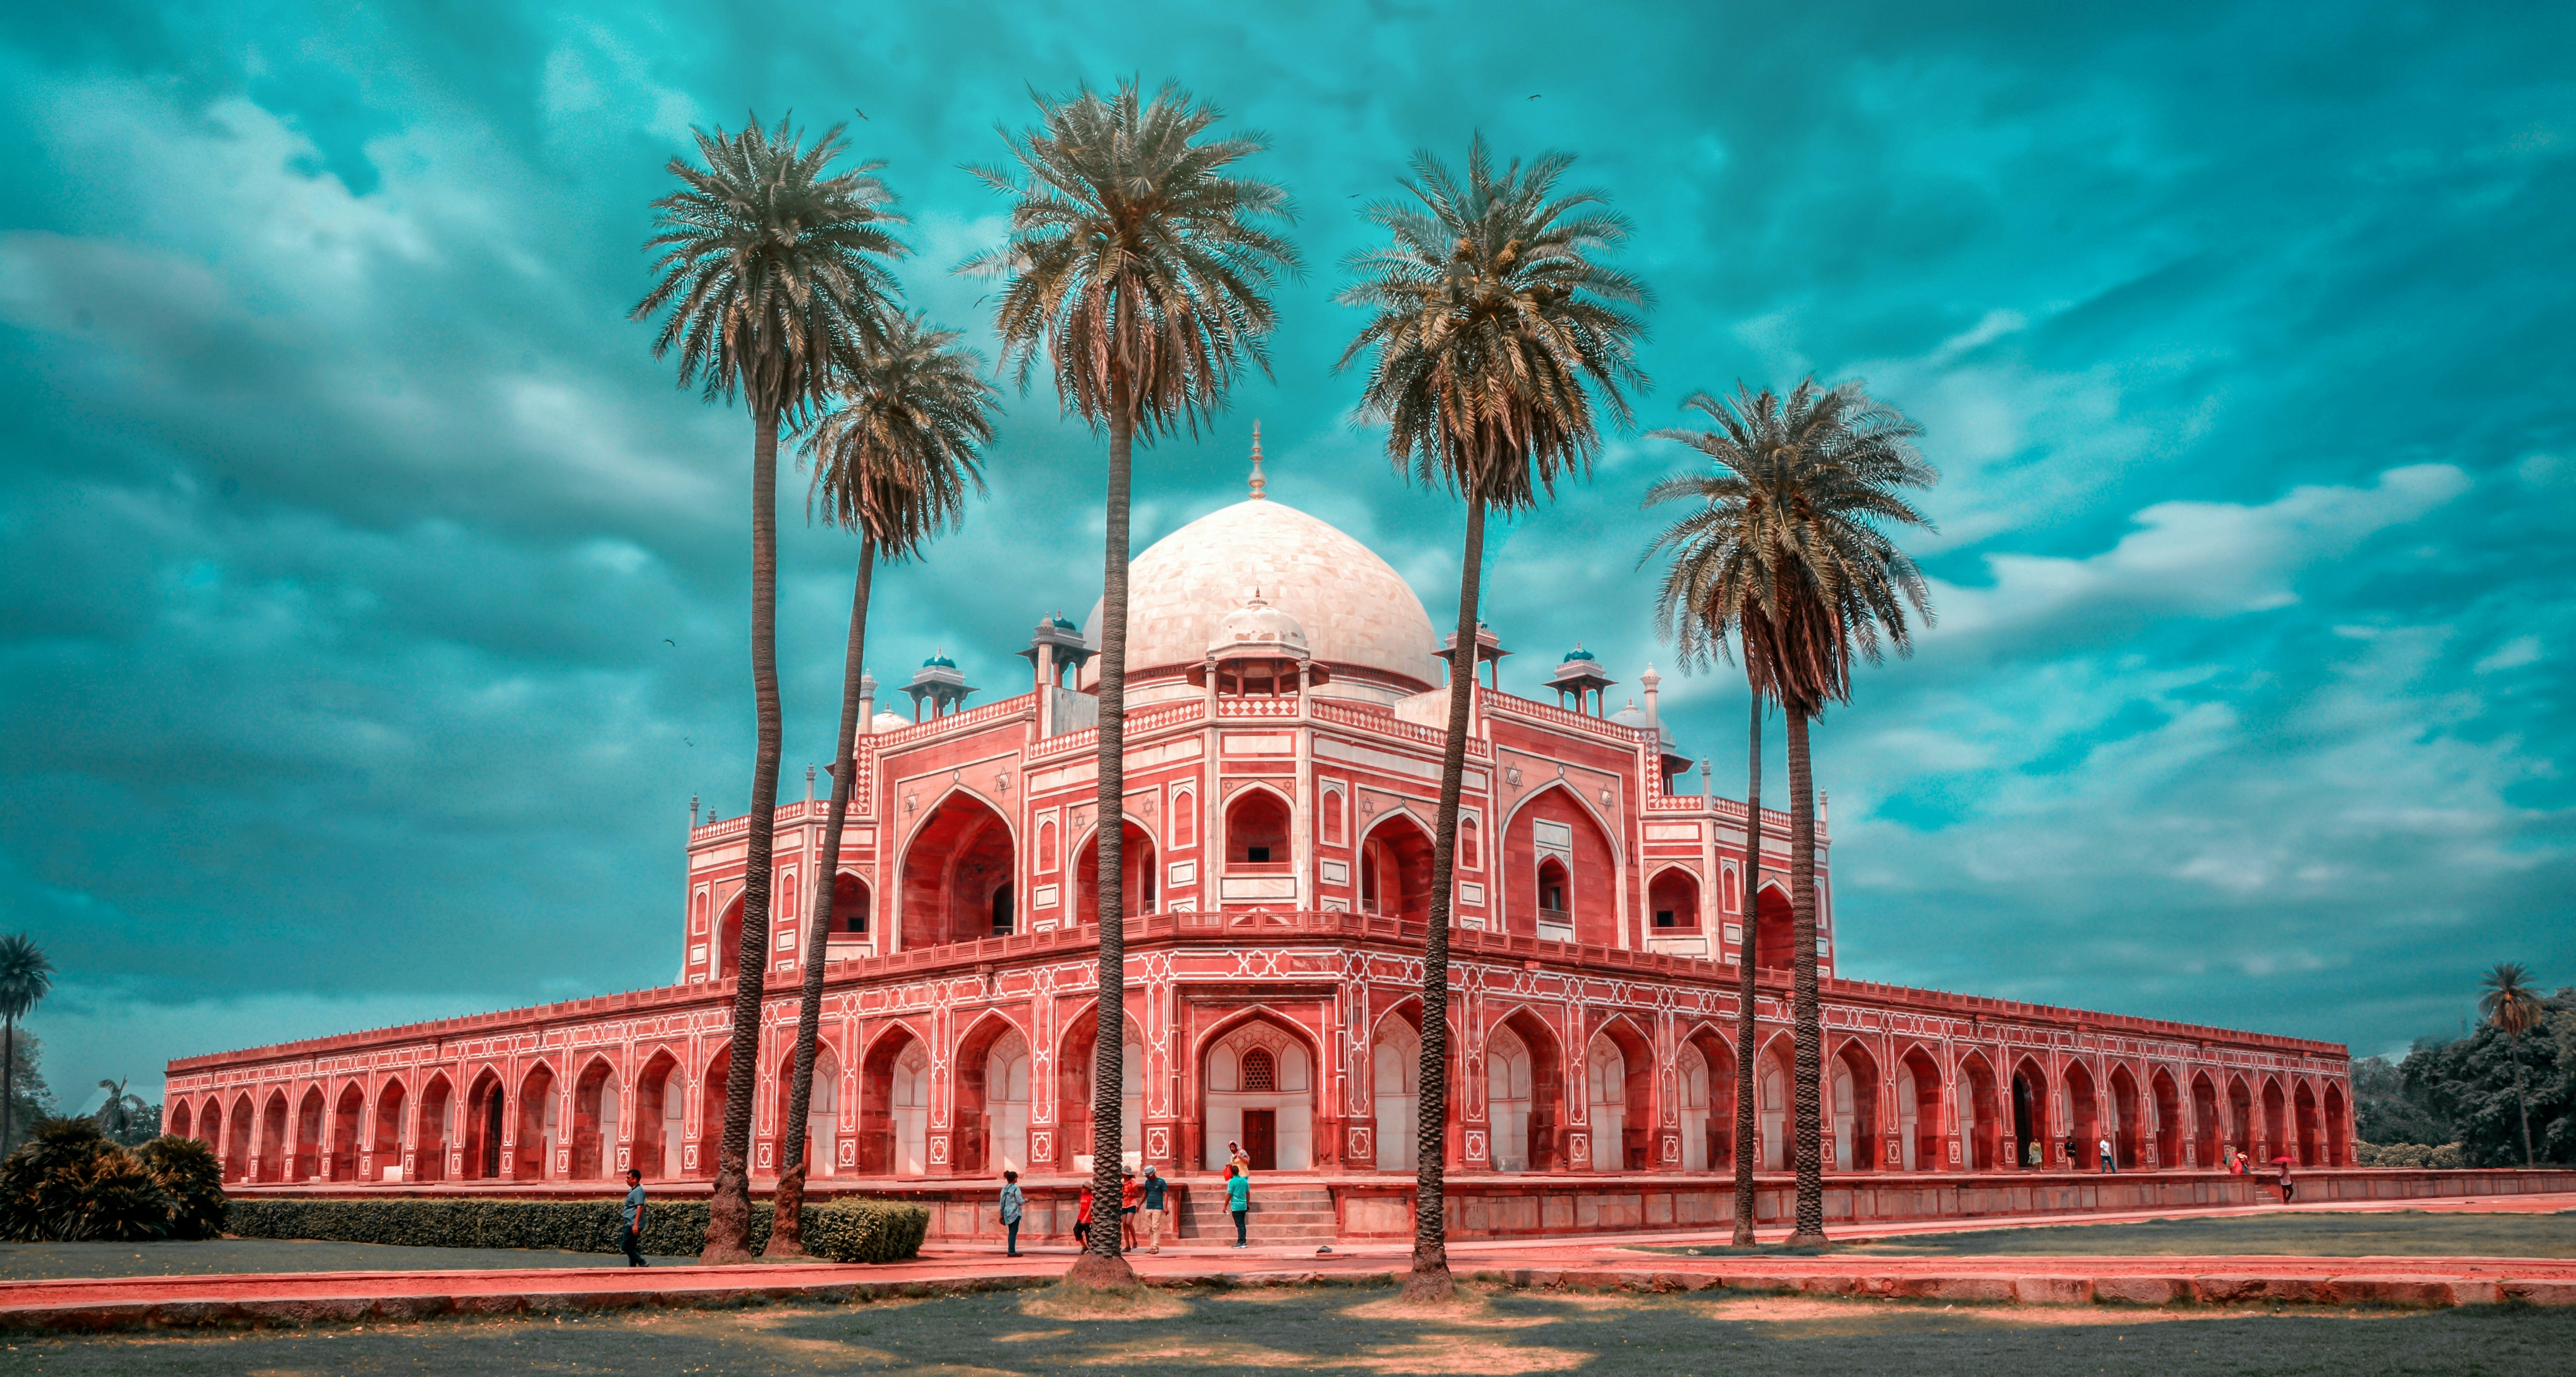 Humayun's tomb (Hindustani or Urdu: Maqbara-i Humayun) is the tomb of the Mughal Emperor Humayun in Delhi, India. The tomb was commissioned by Humayun's first wife and chief consort, Empress Bega Begum (also known as Haji Begum),[1][2][3][4][5][6][7] in 1558, and designed by Mirak Mirza Ghiyas and his son, Sayyid Muhammad,[8] Persian architects chosen by her.[9][10] It was the first garden-tomb on the Indian subcontinent,[11] and is located in Nizamuddin East, Delhi, India, close to the Dina-panah Citadel, also known as Purana Qila (Old Fort), that Humayun found in 1533.